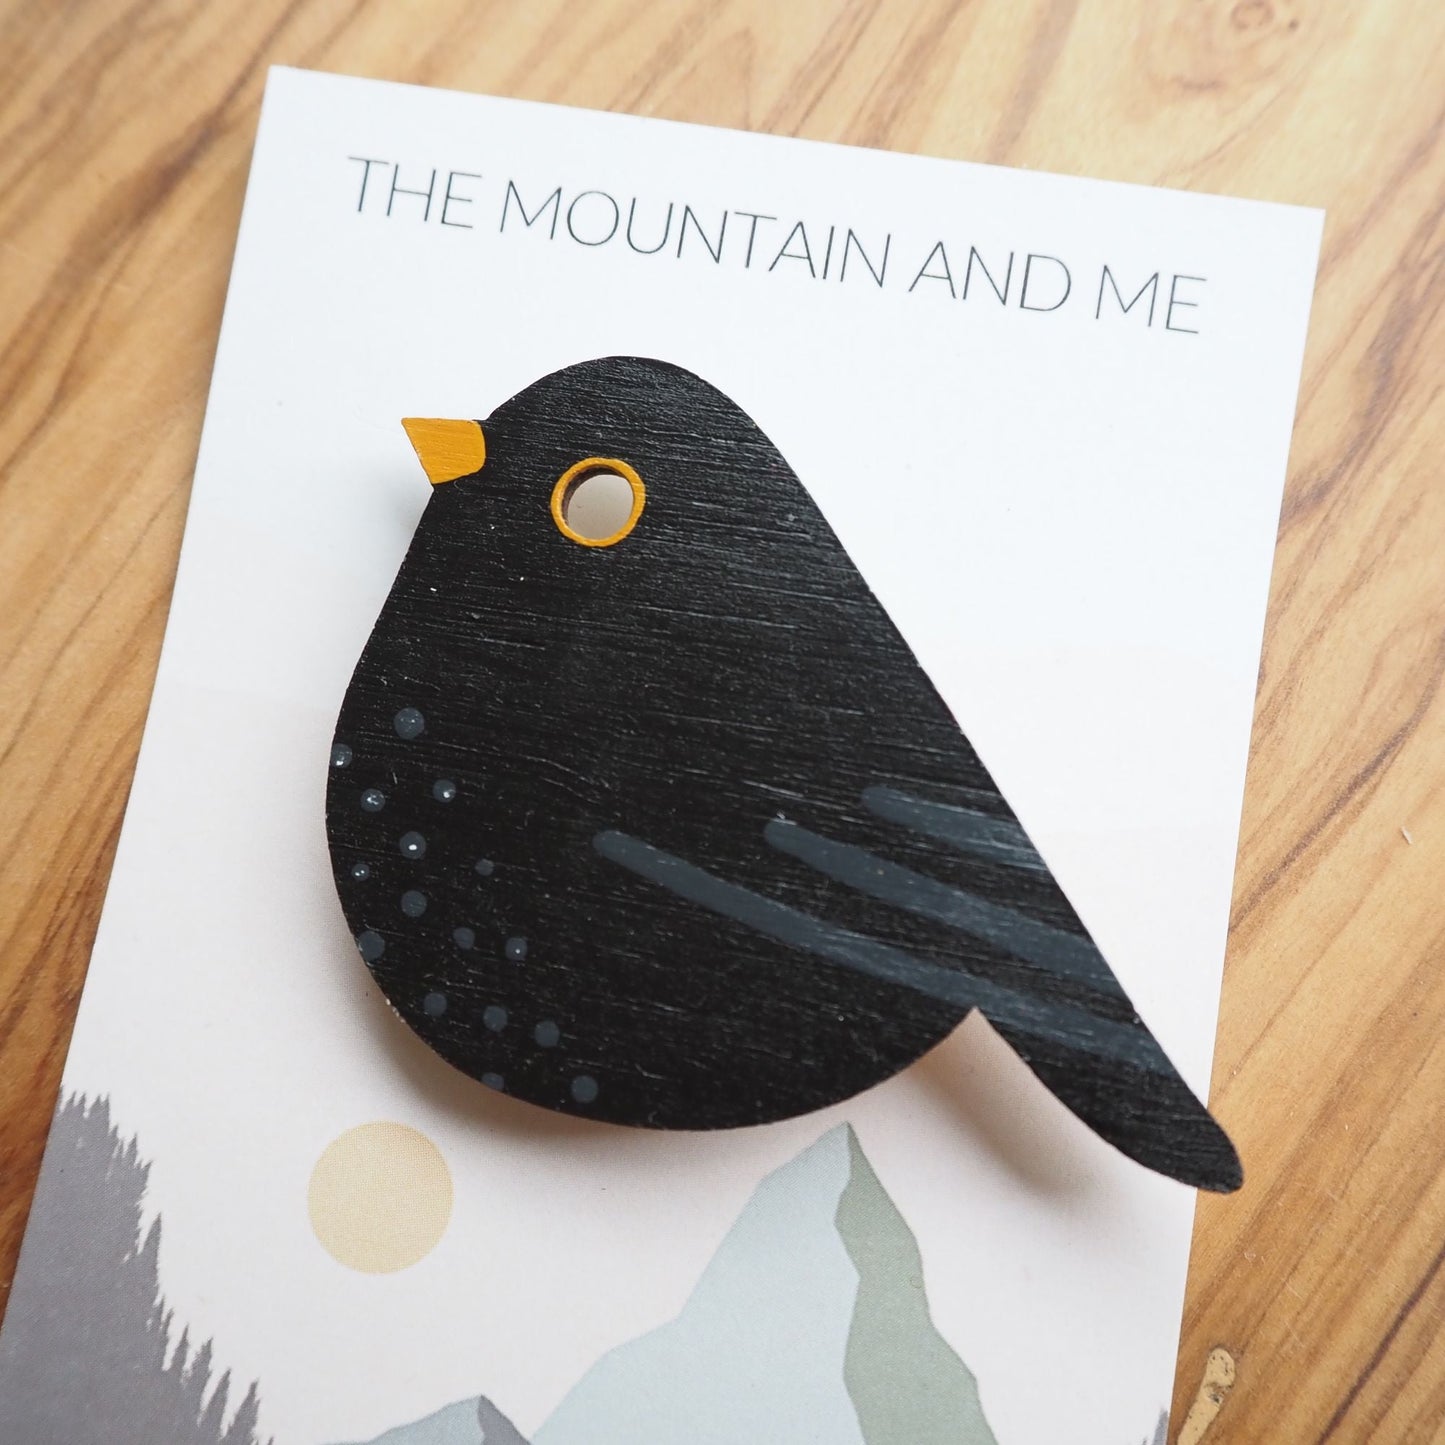 Painted blackbird brooch on the Mountain and Me branded backing card.